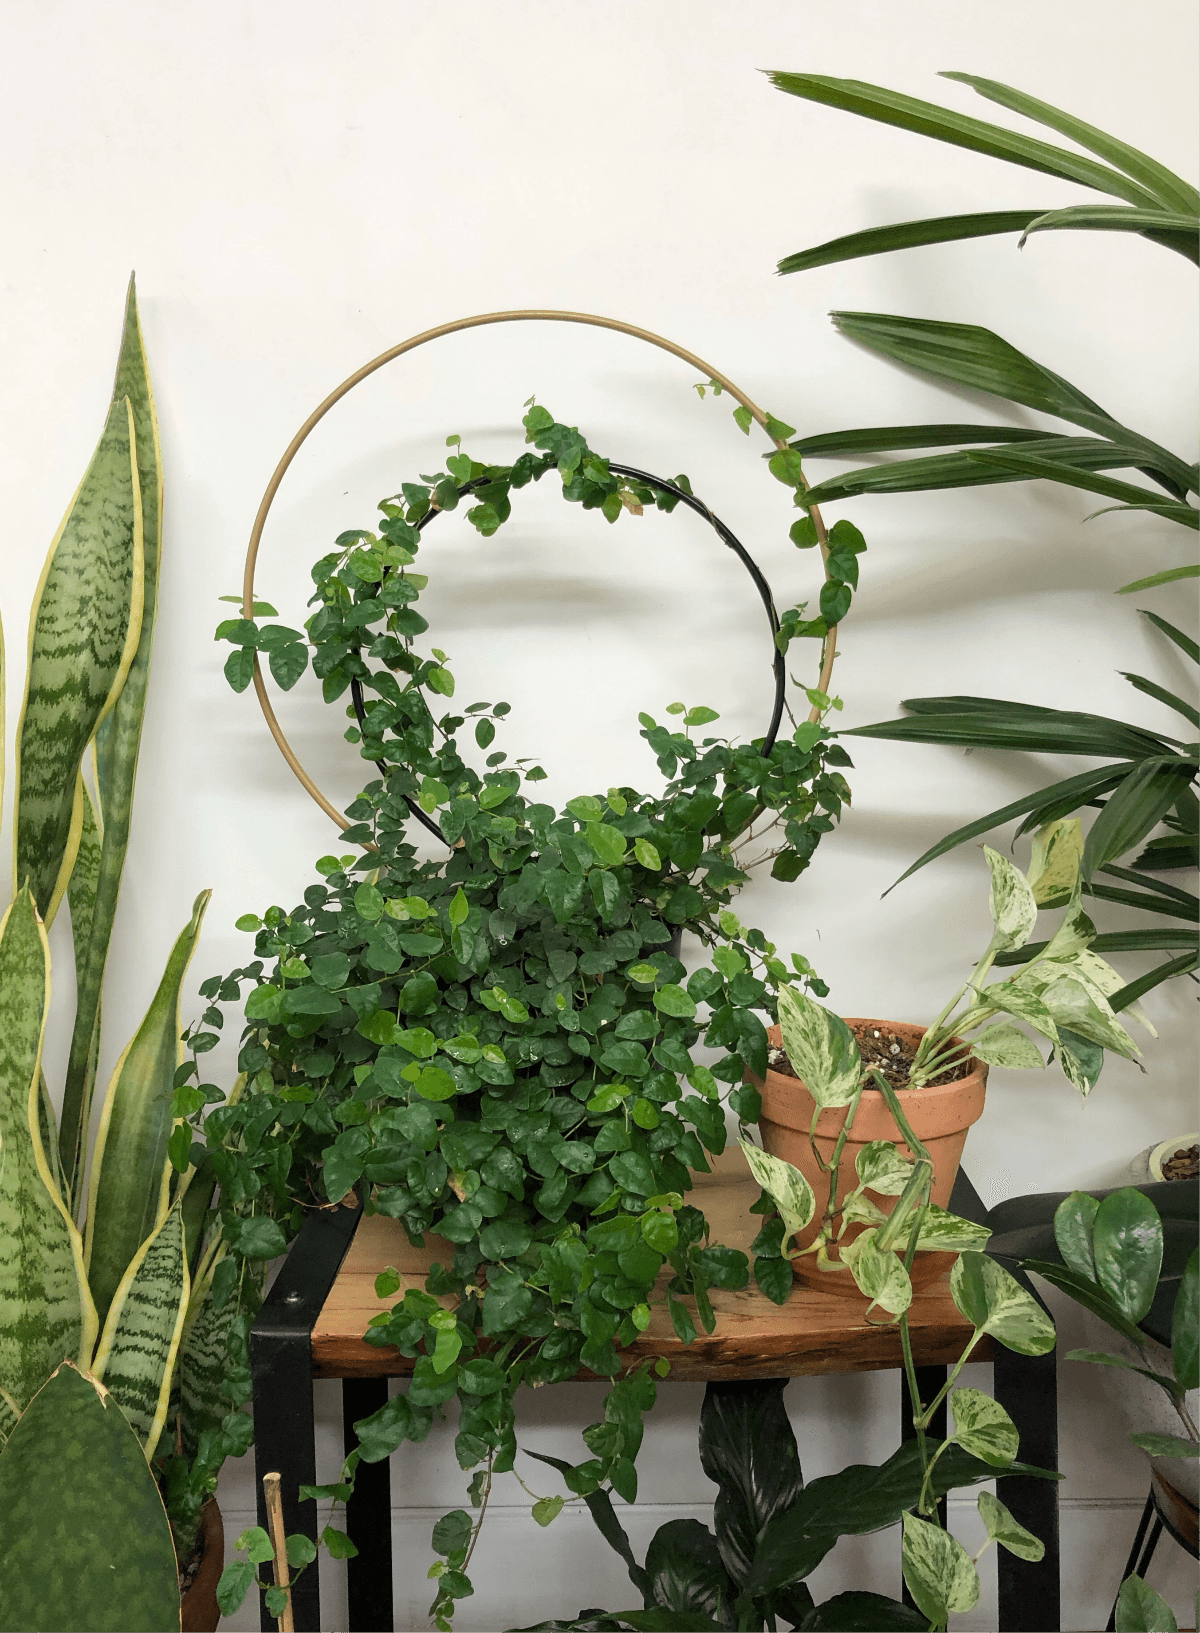 two Round plant trellis with green ficus growing around it, a variegated ivy sits in a terracotta plant pot on a wooden shelf gold home decor indoor plant gift